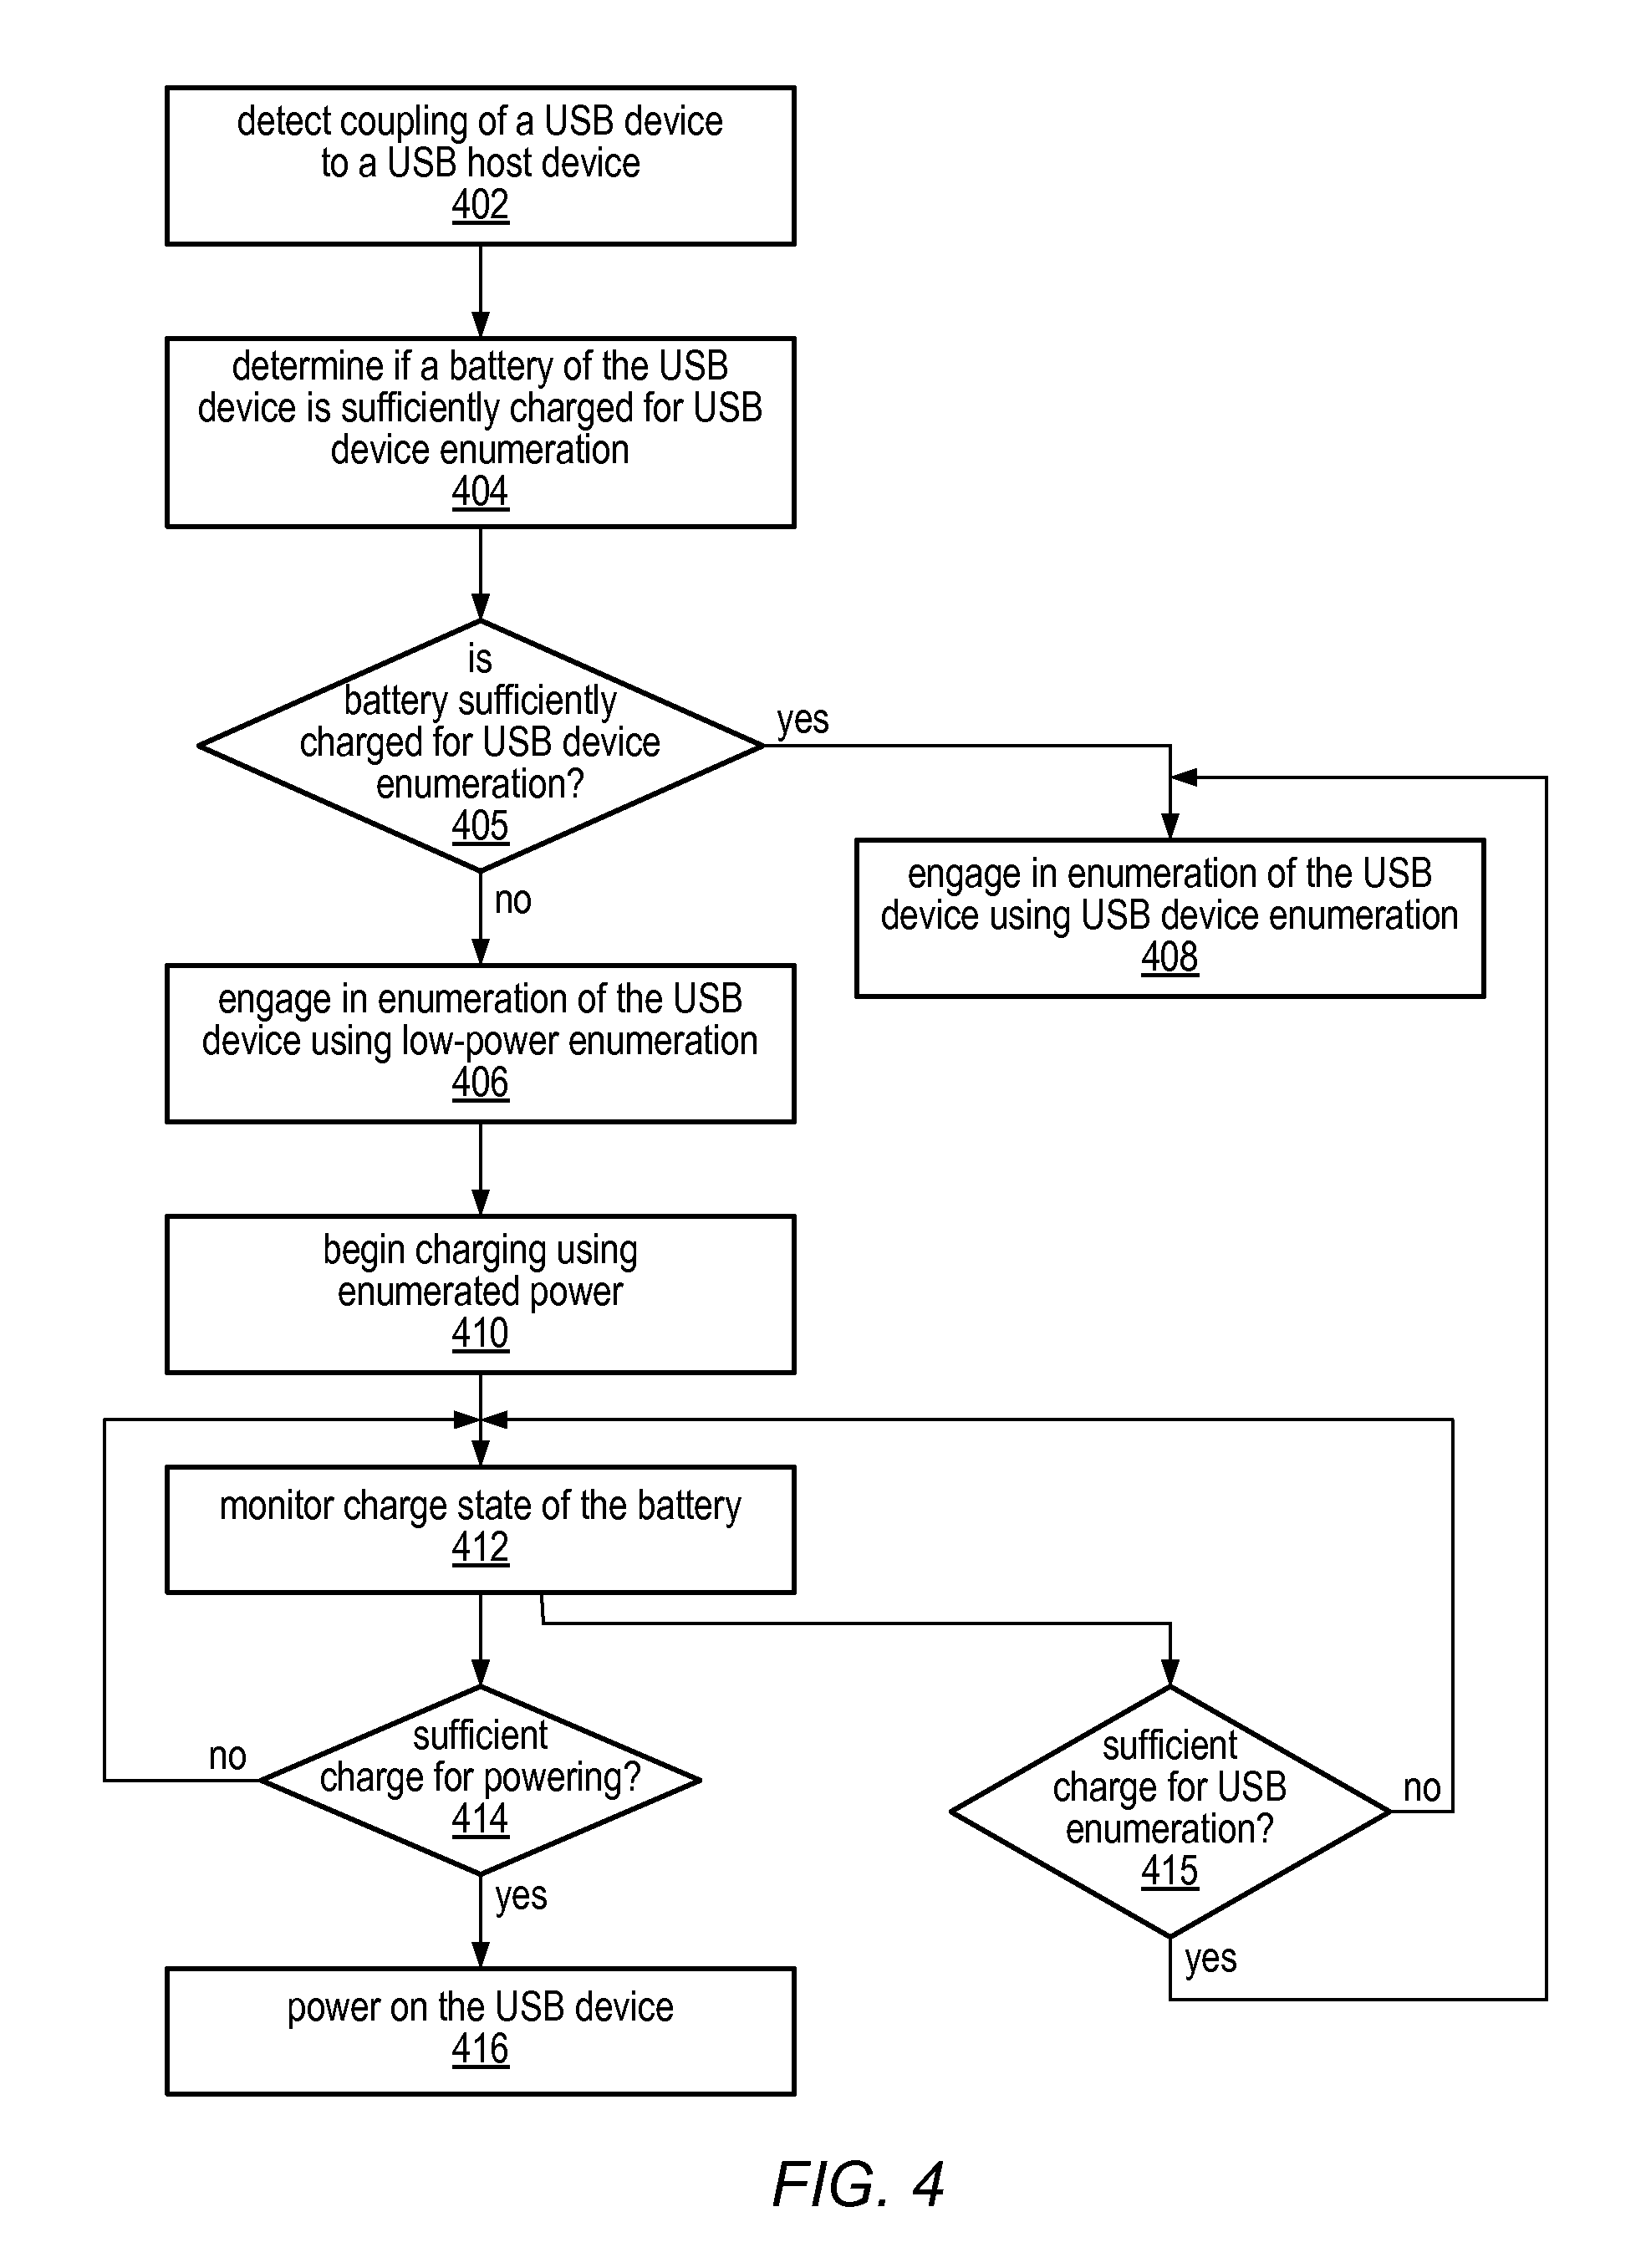 System and Method for Rapidly Charging a USB Device